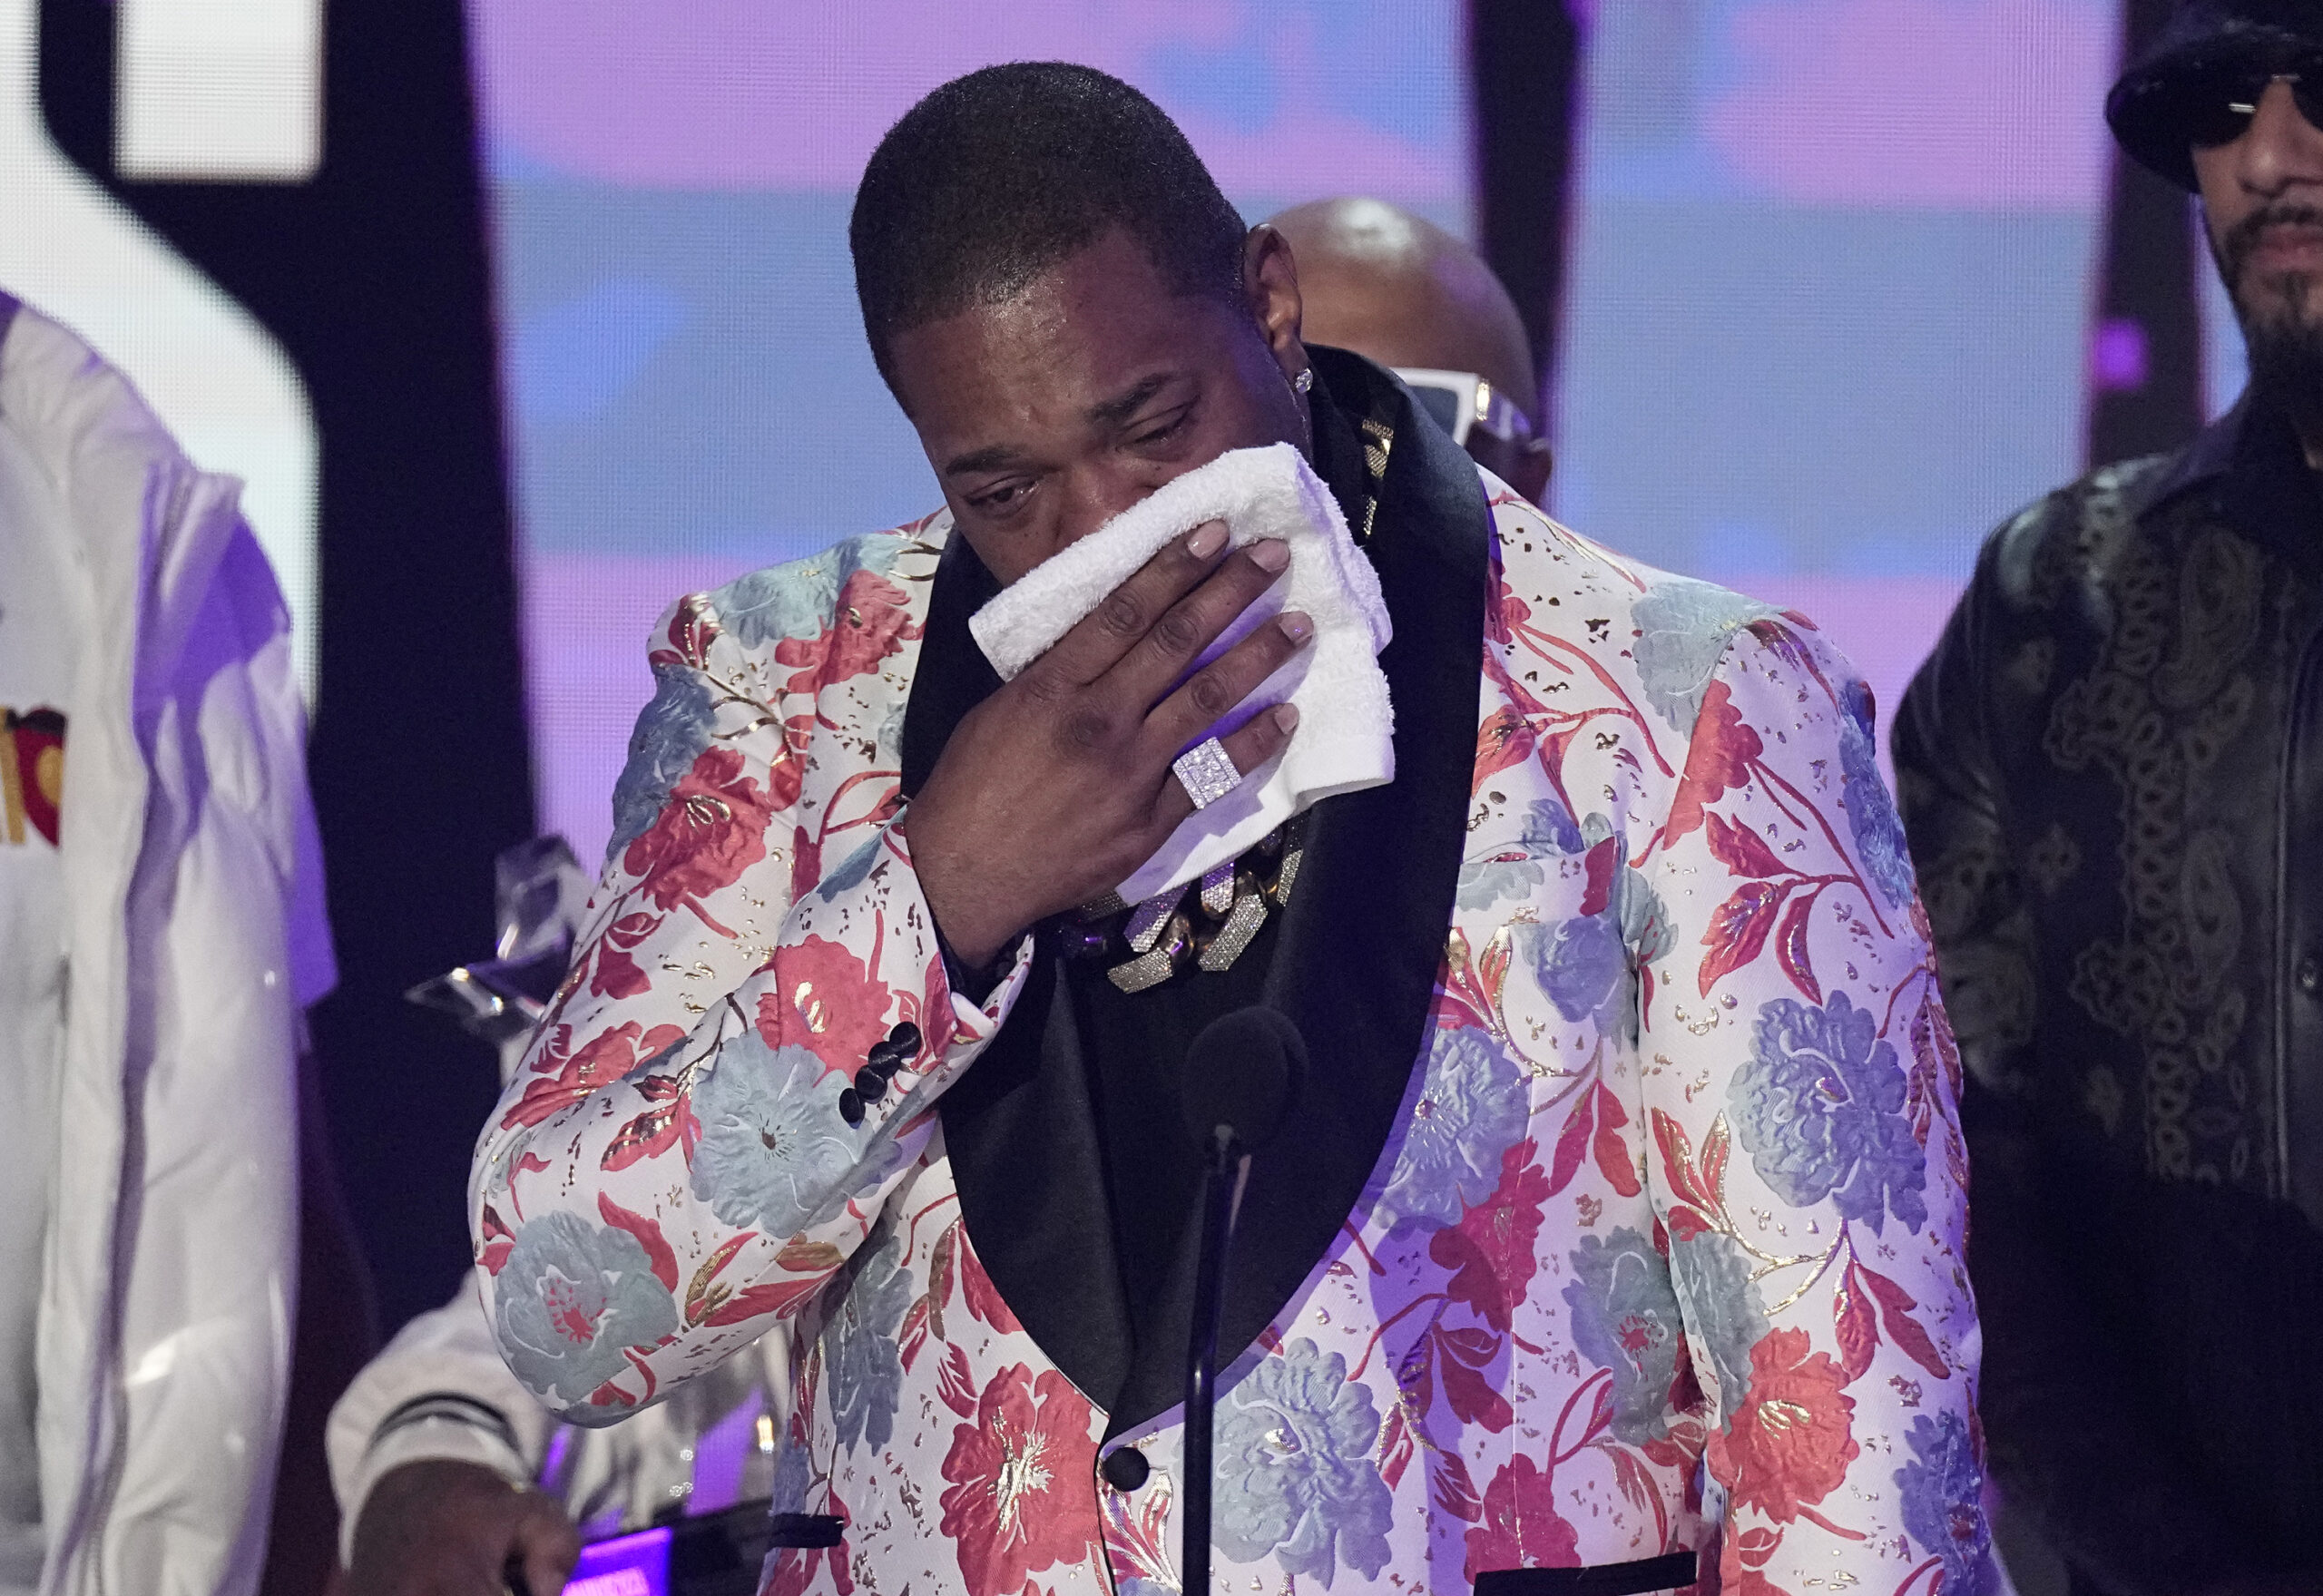 Busta Rhymes reacts onstage as he accepts the Lifetime Achievement Award at the 2023 BET Awards on Sunday, June 25, 2023, at the Microsoft Theater in Los Angeles. Photo credit: Mark Terrill, The Associated Press